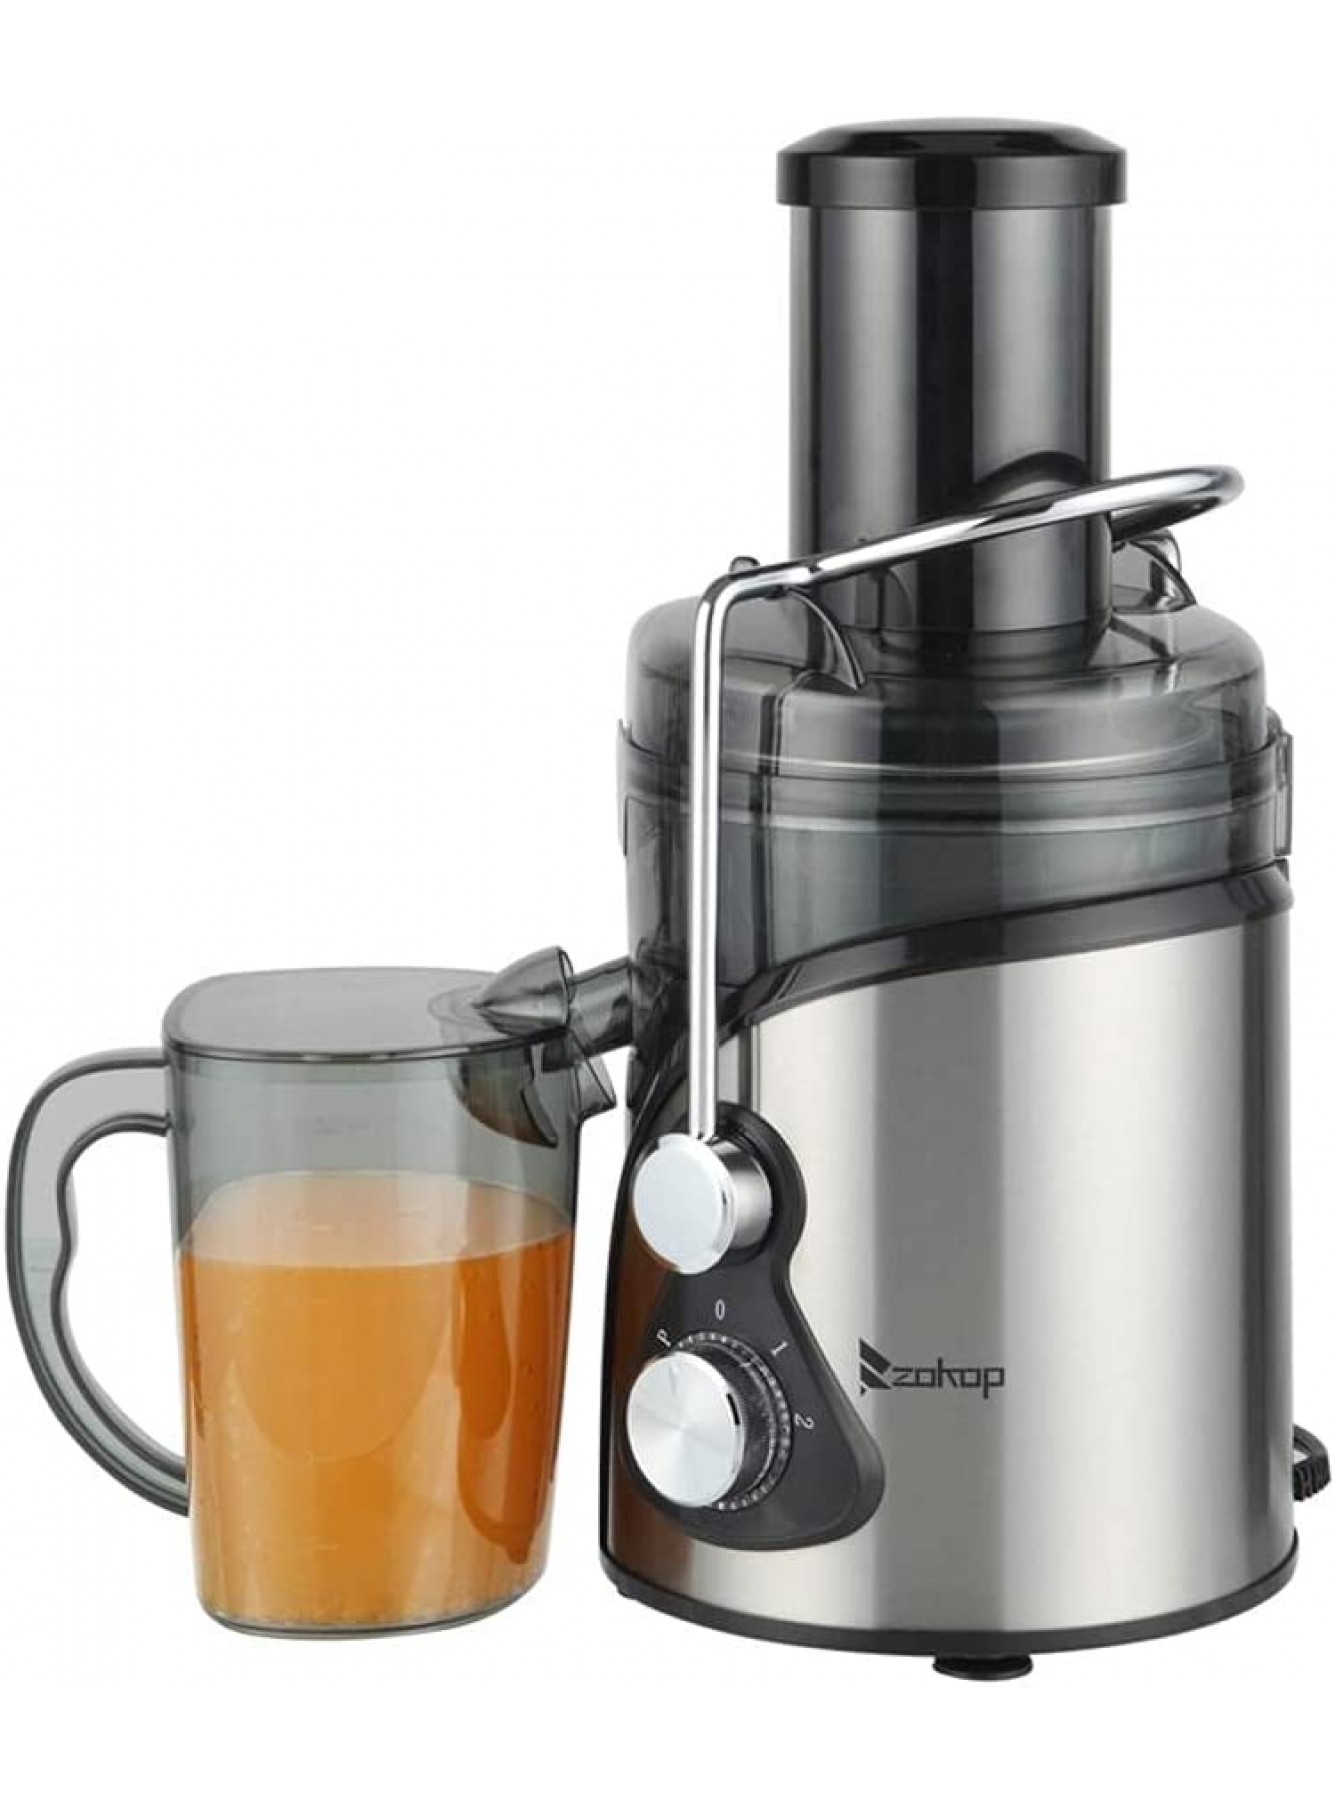 Electric Juicer Juice Extractor Stainless Steel Juicer Machine with 3.4'' Wide Mouth 3 Speed Centrifugal Juicer Maker for Fruits and Vegs with Non-Slip Feet BPA-Free for Celery Carrot Apple Vegetable B09967ZR8B